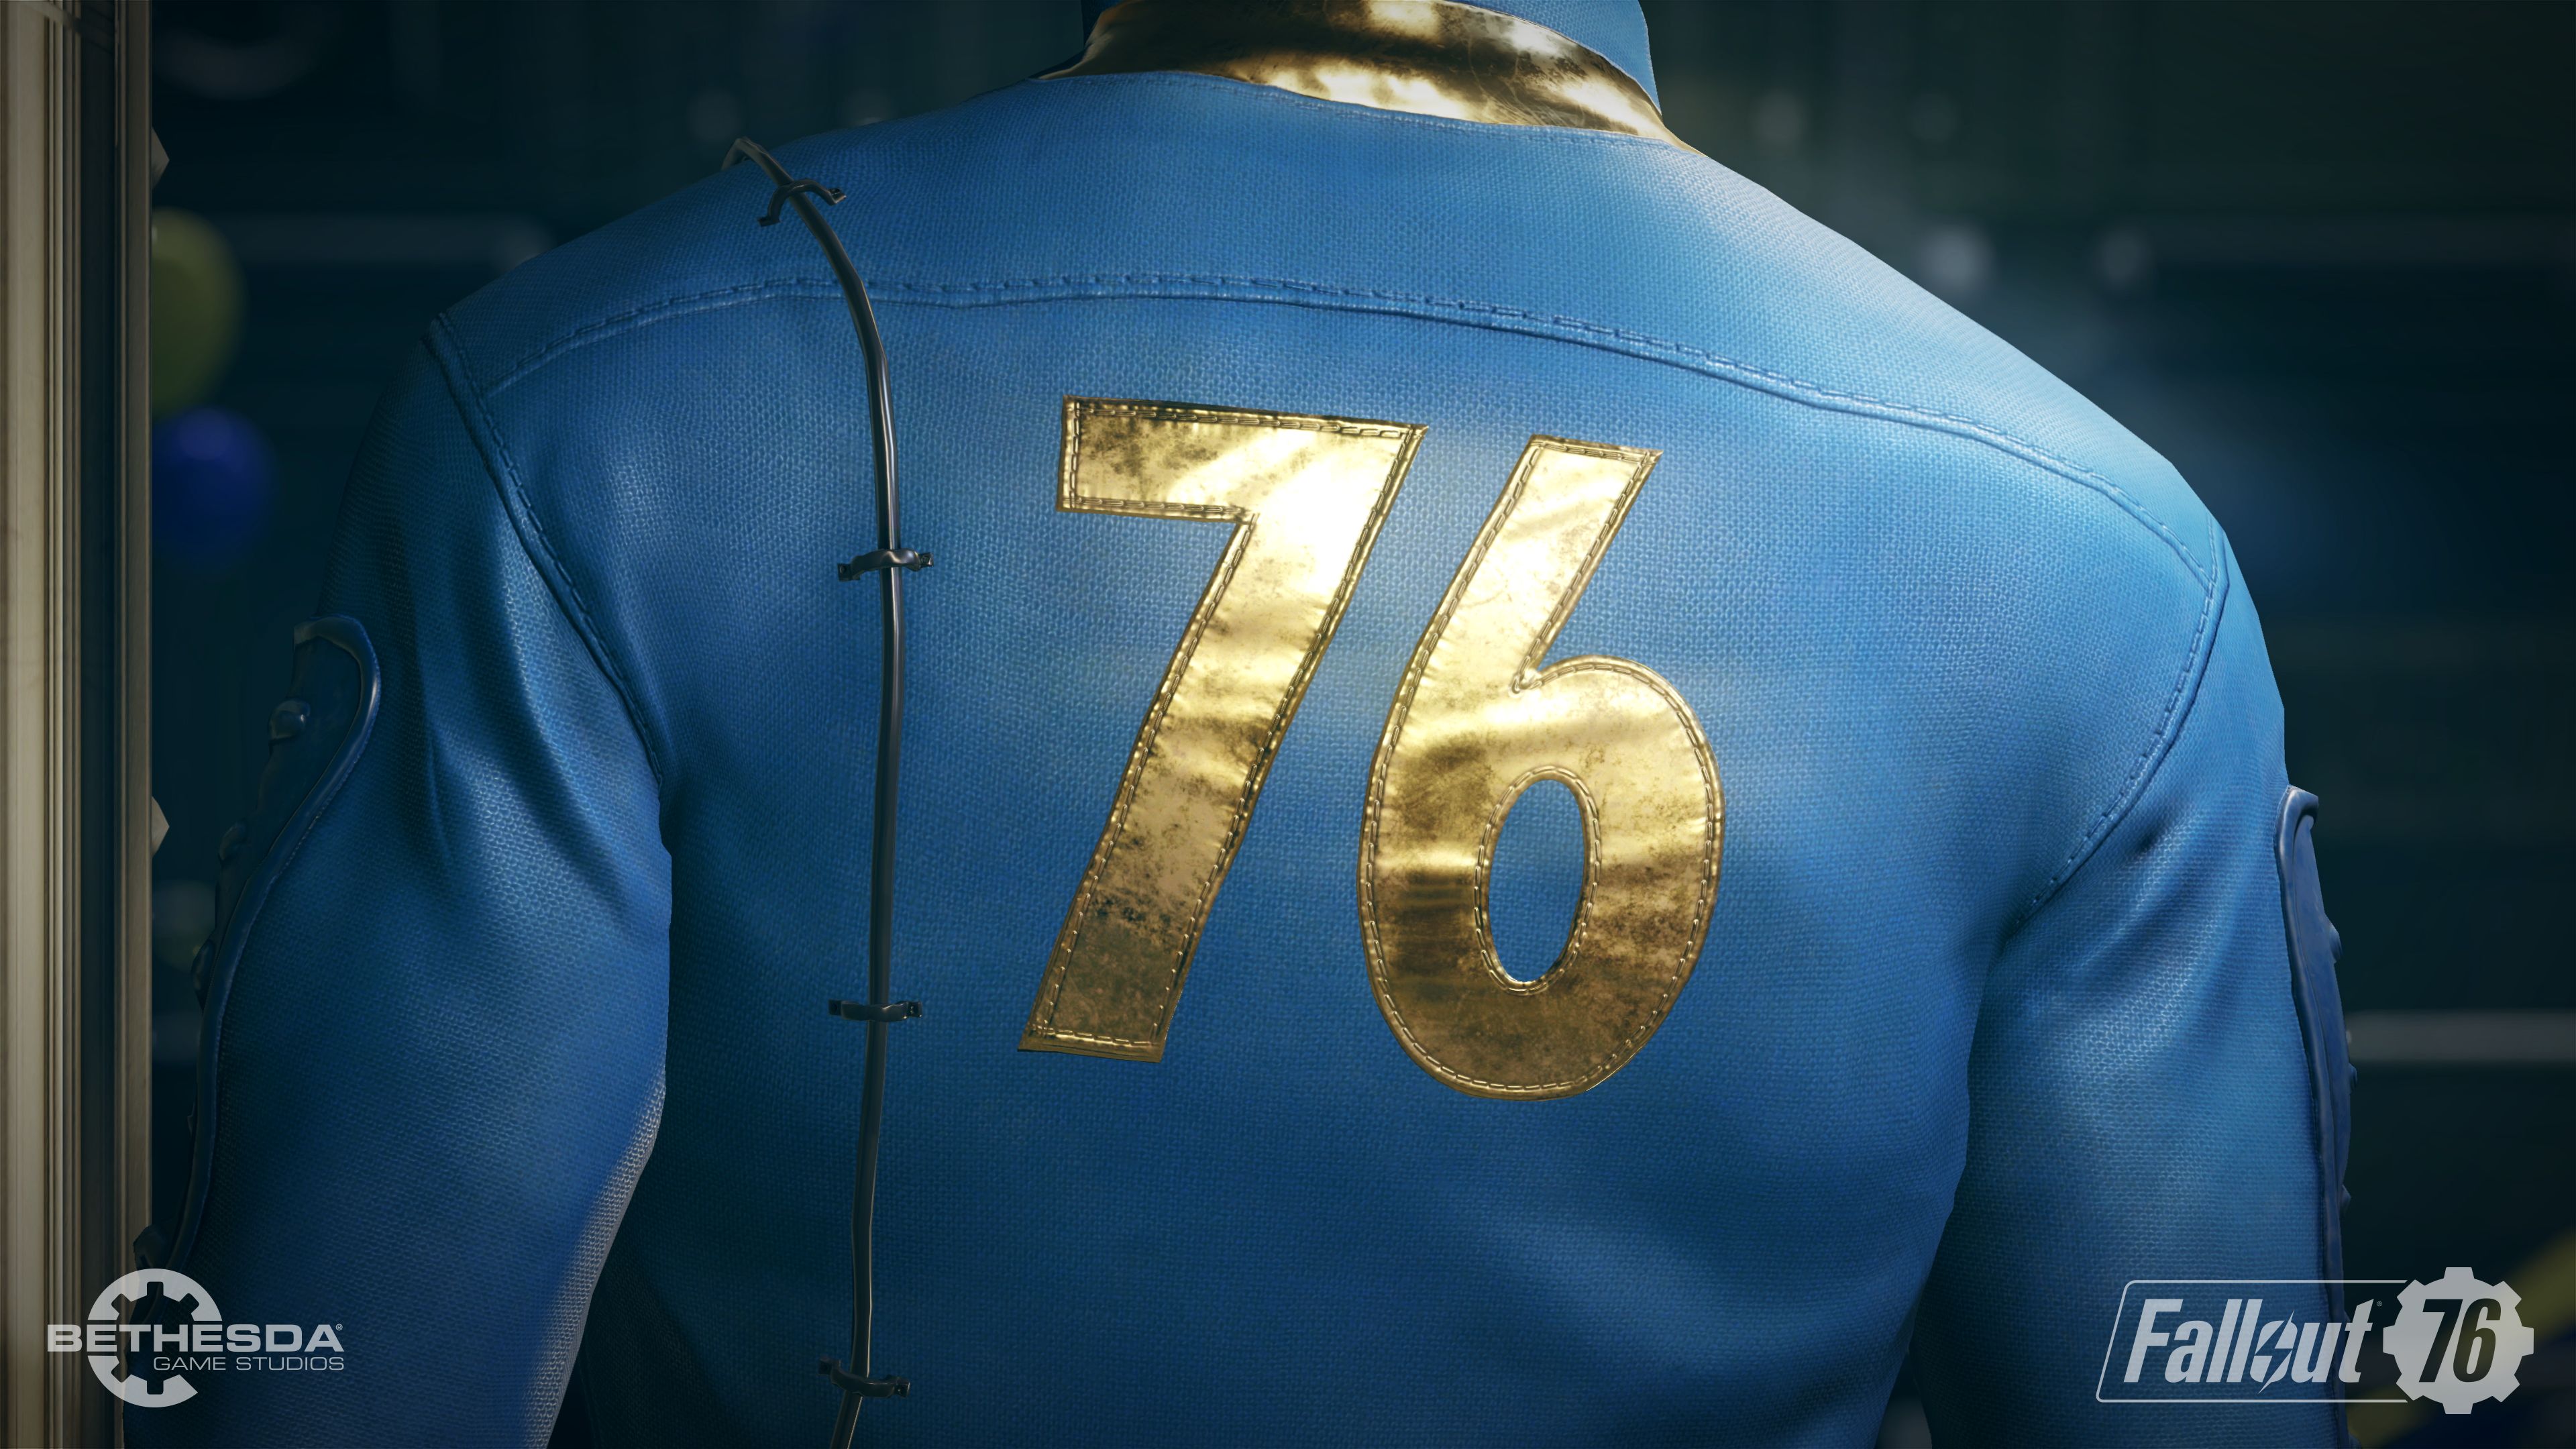 Fallout 76 Release Date